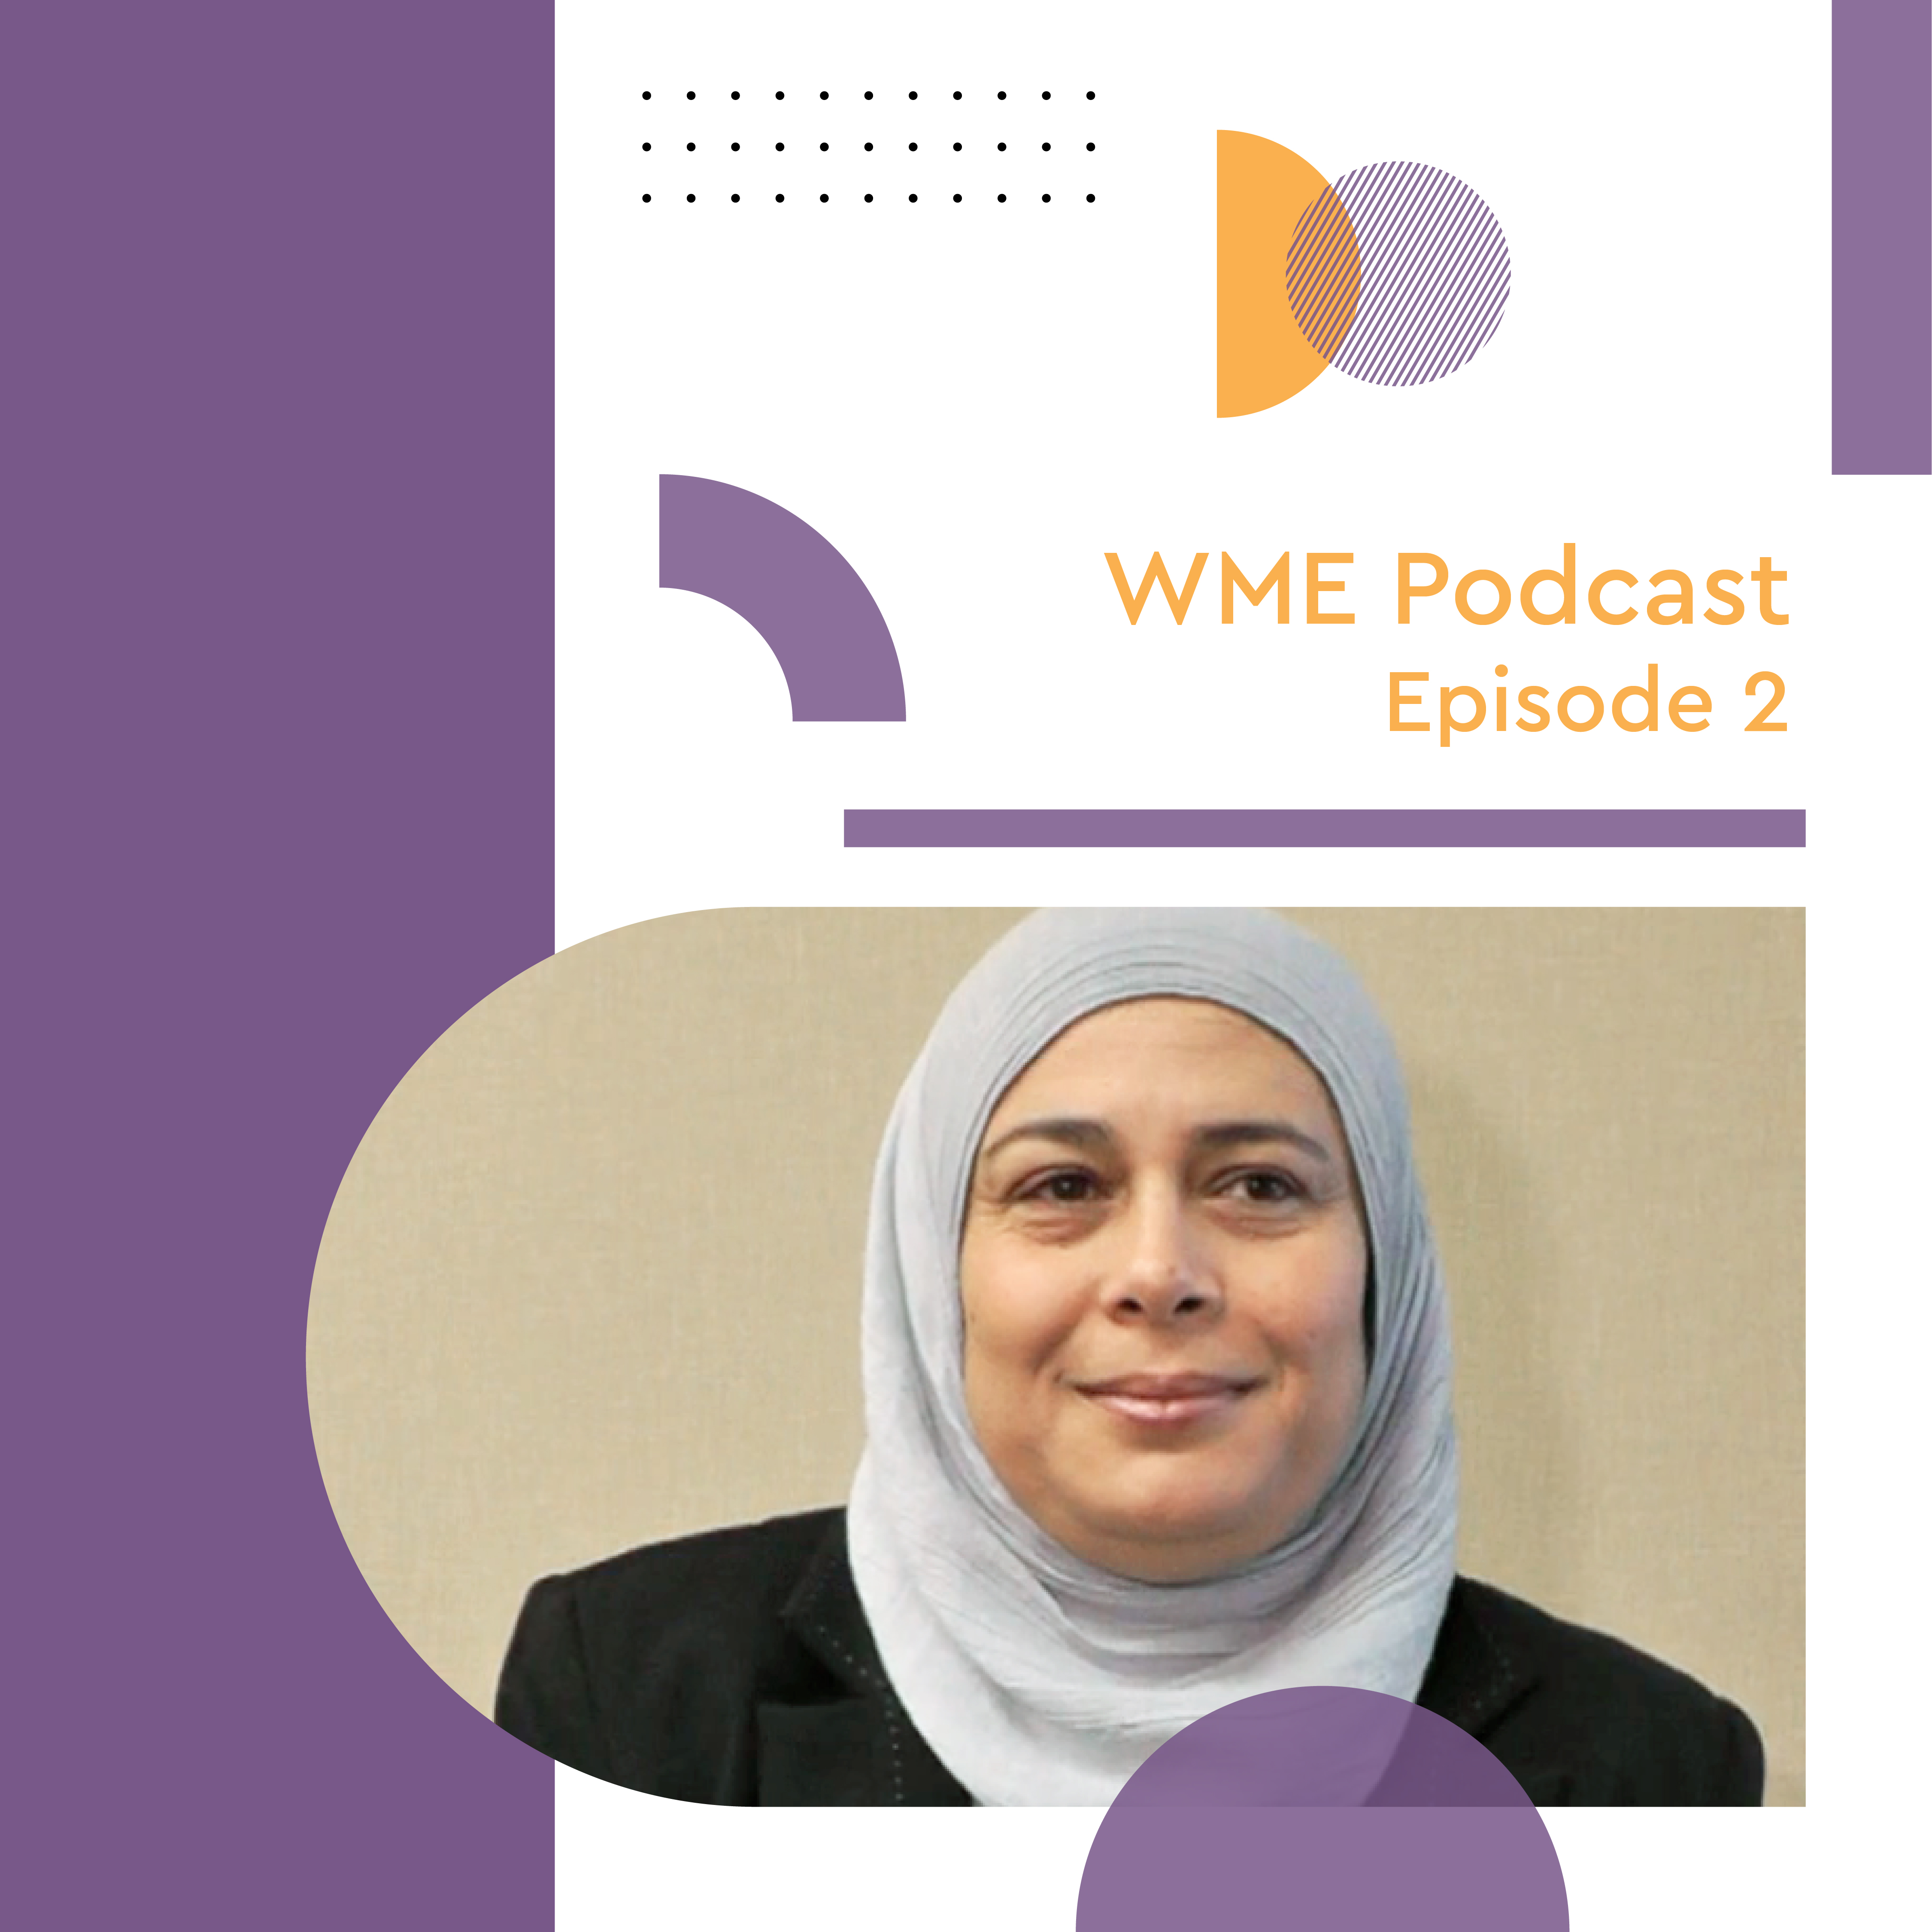 Episode 2: Arab Women Beyond Stereotypes with Dr. Hadeel Qazzaz